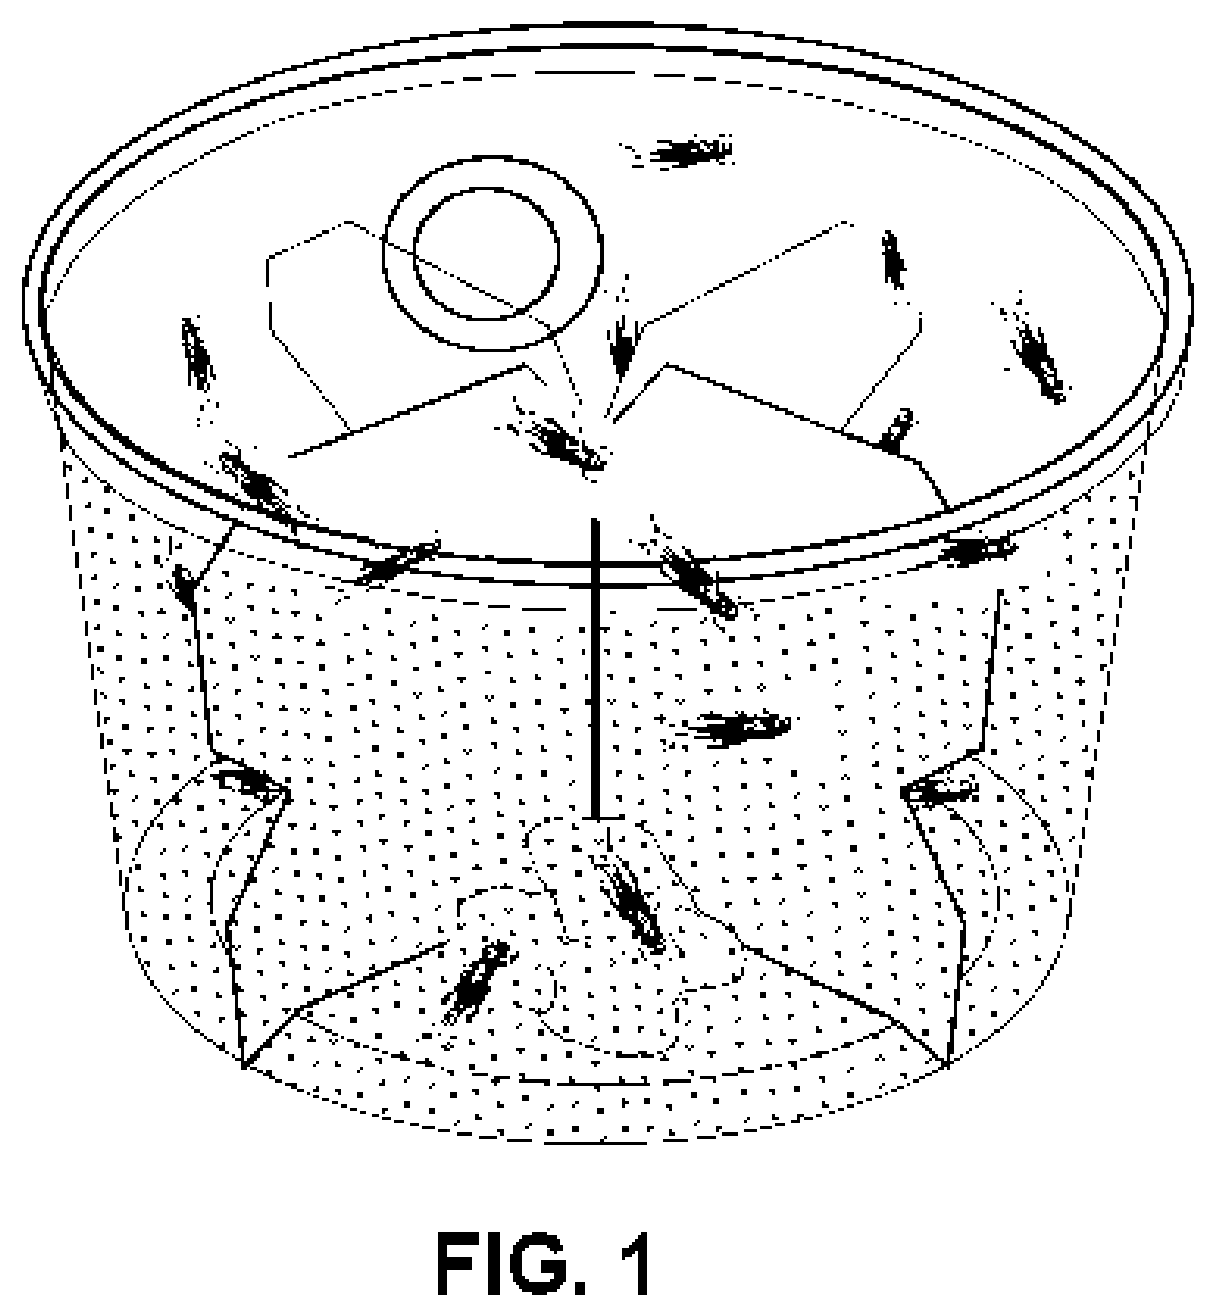 Insect container